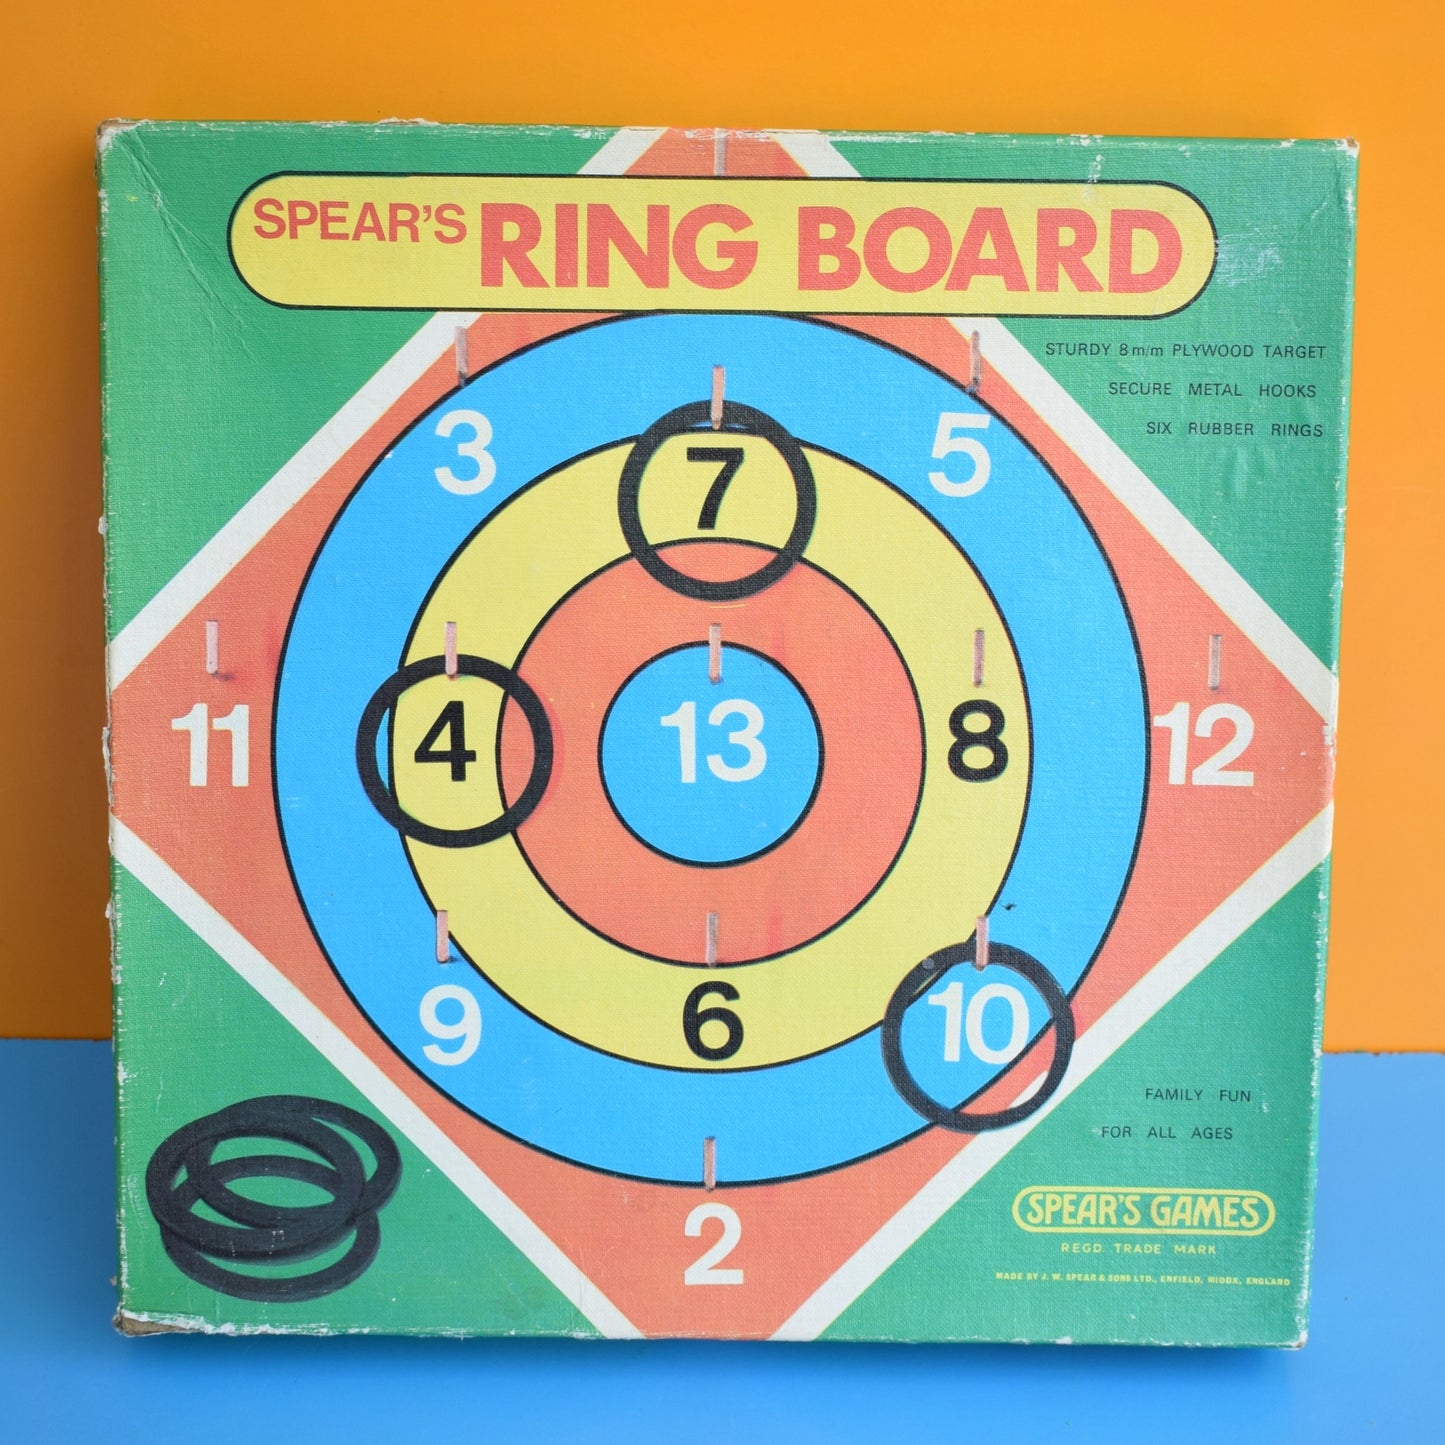 Vintage 1970s Ring Board Spears Game